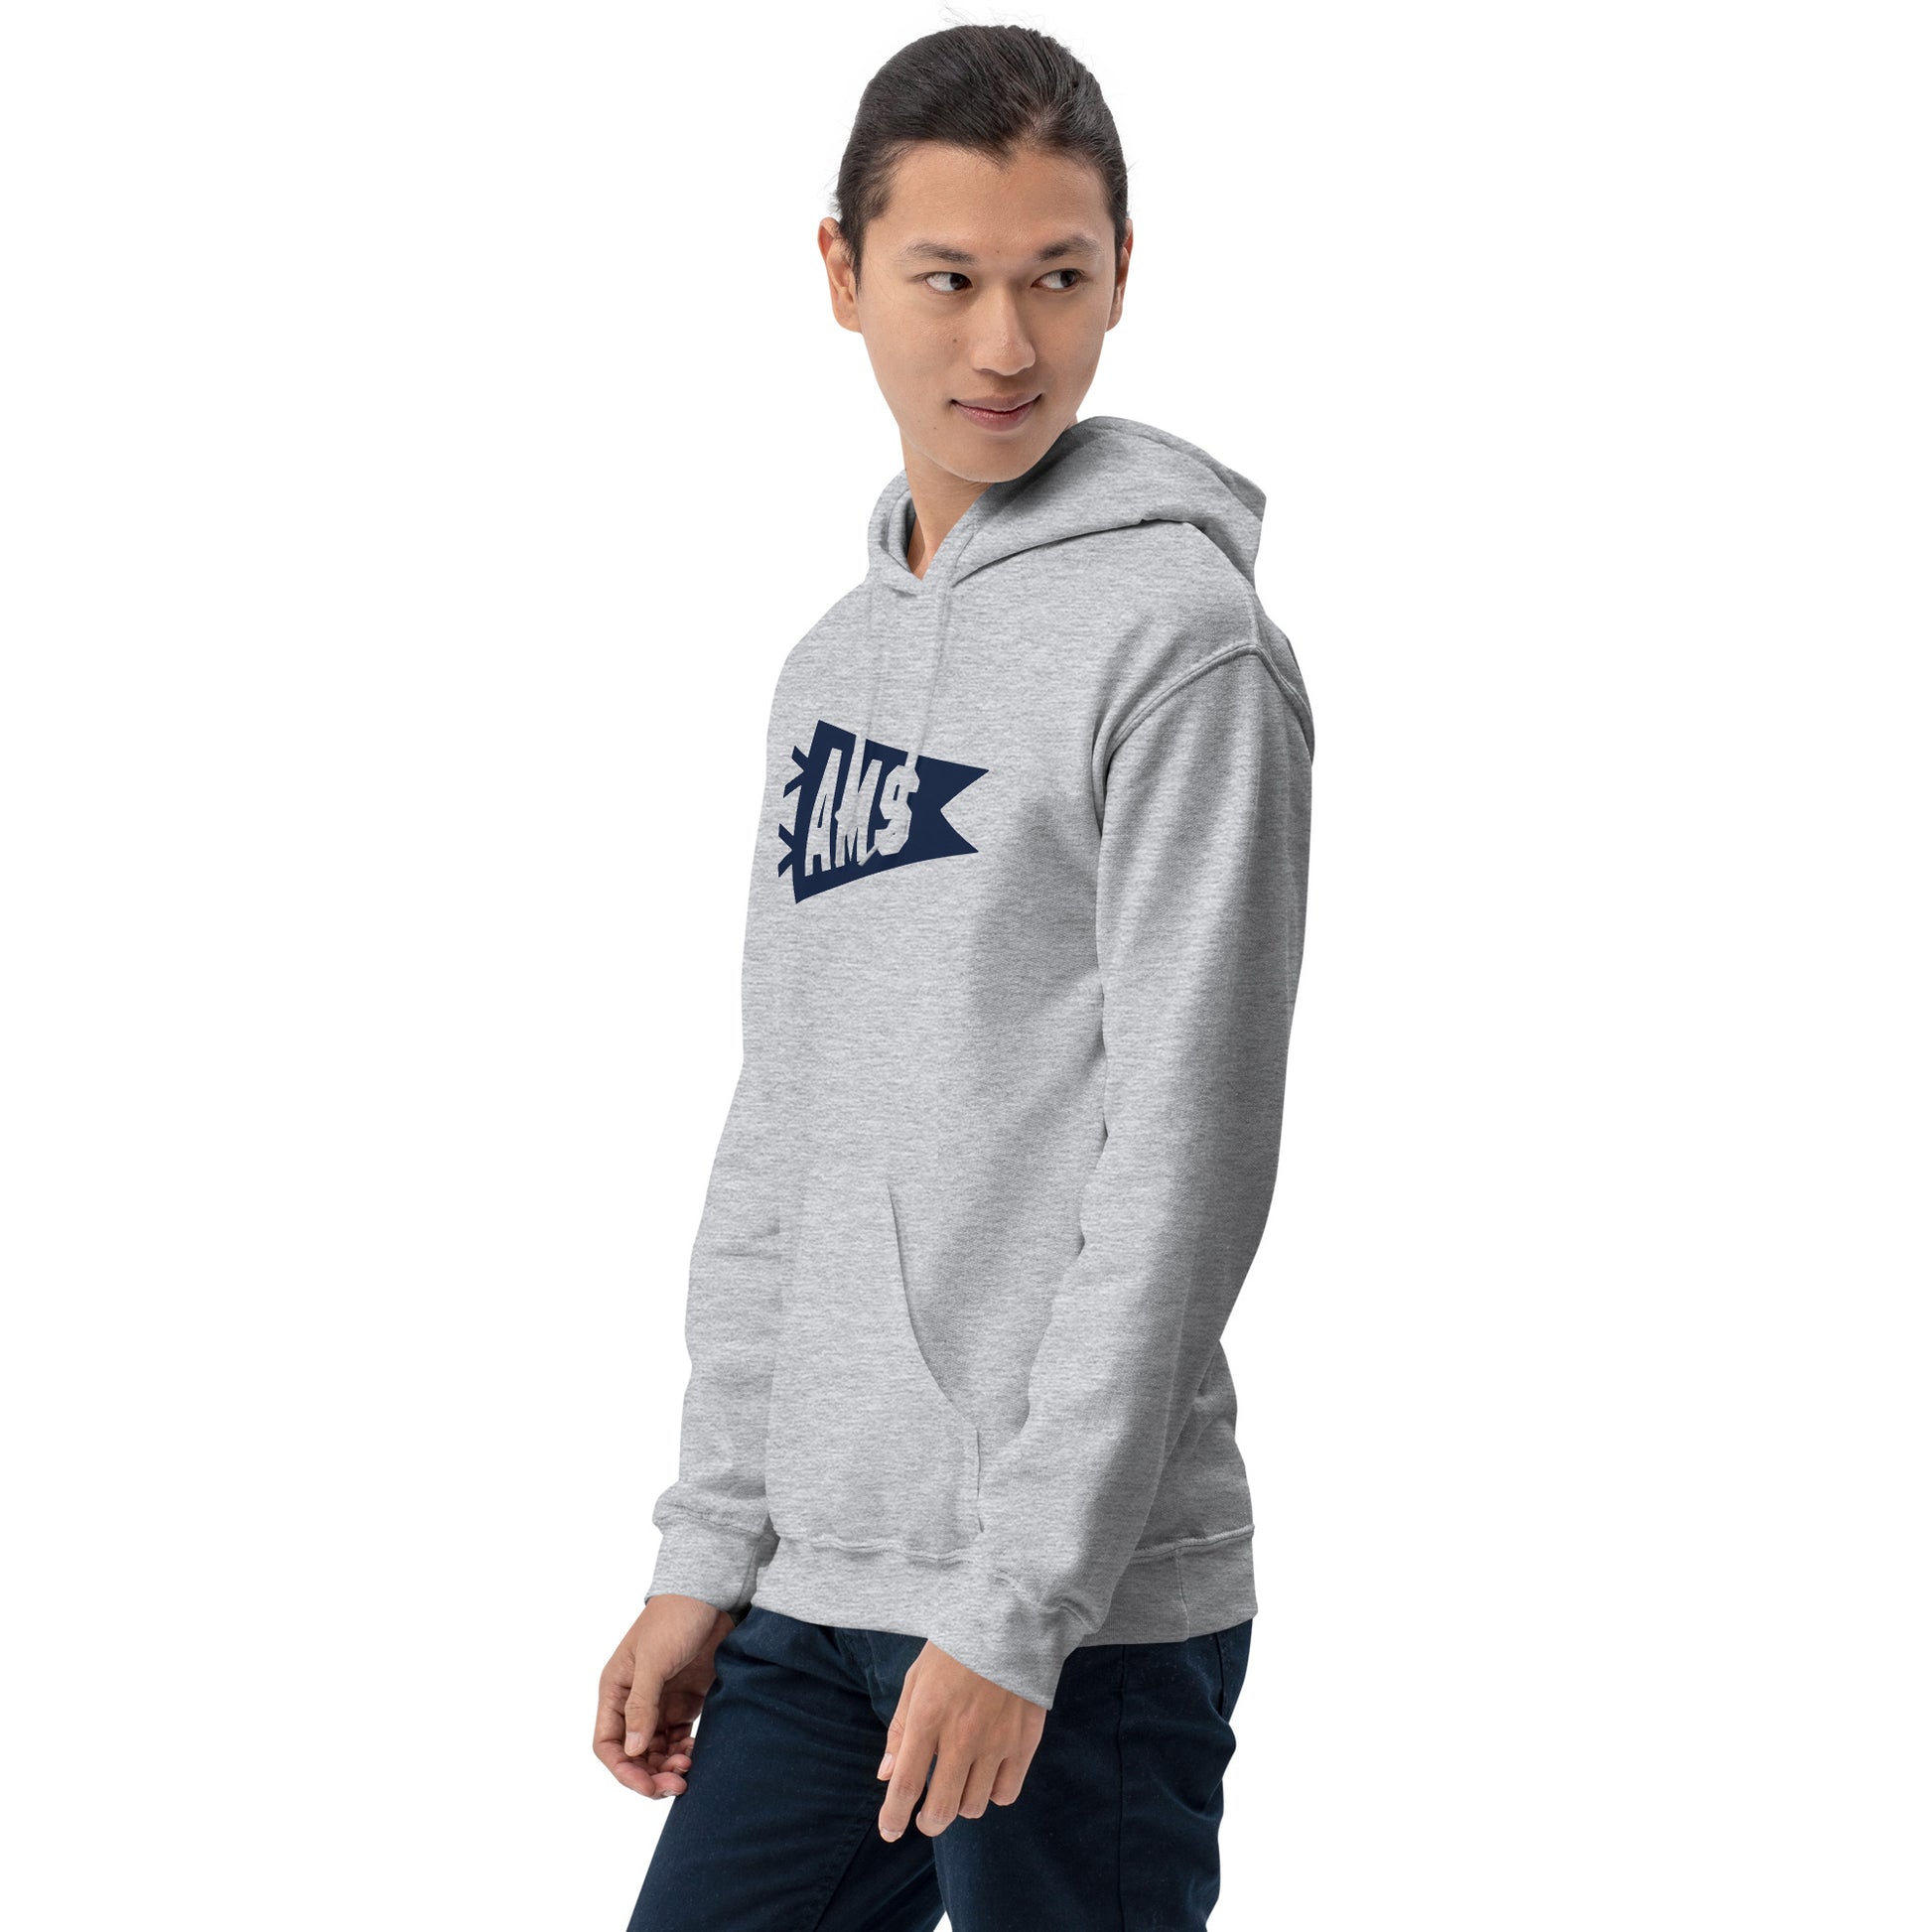 Airport Code Unisex Hoodie - Navy Blue Graphic • AMS Amsterdam • YHM Designs - Image 10